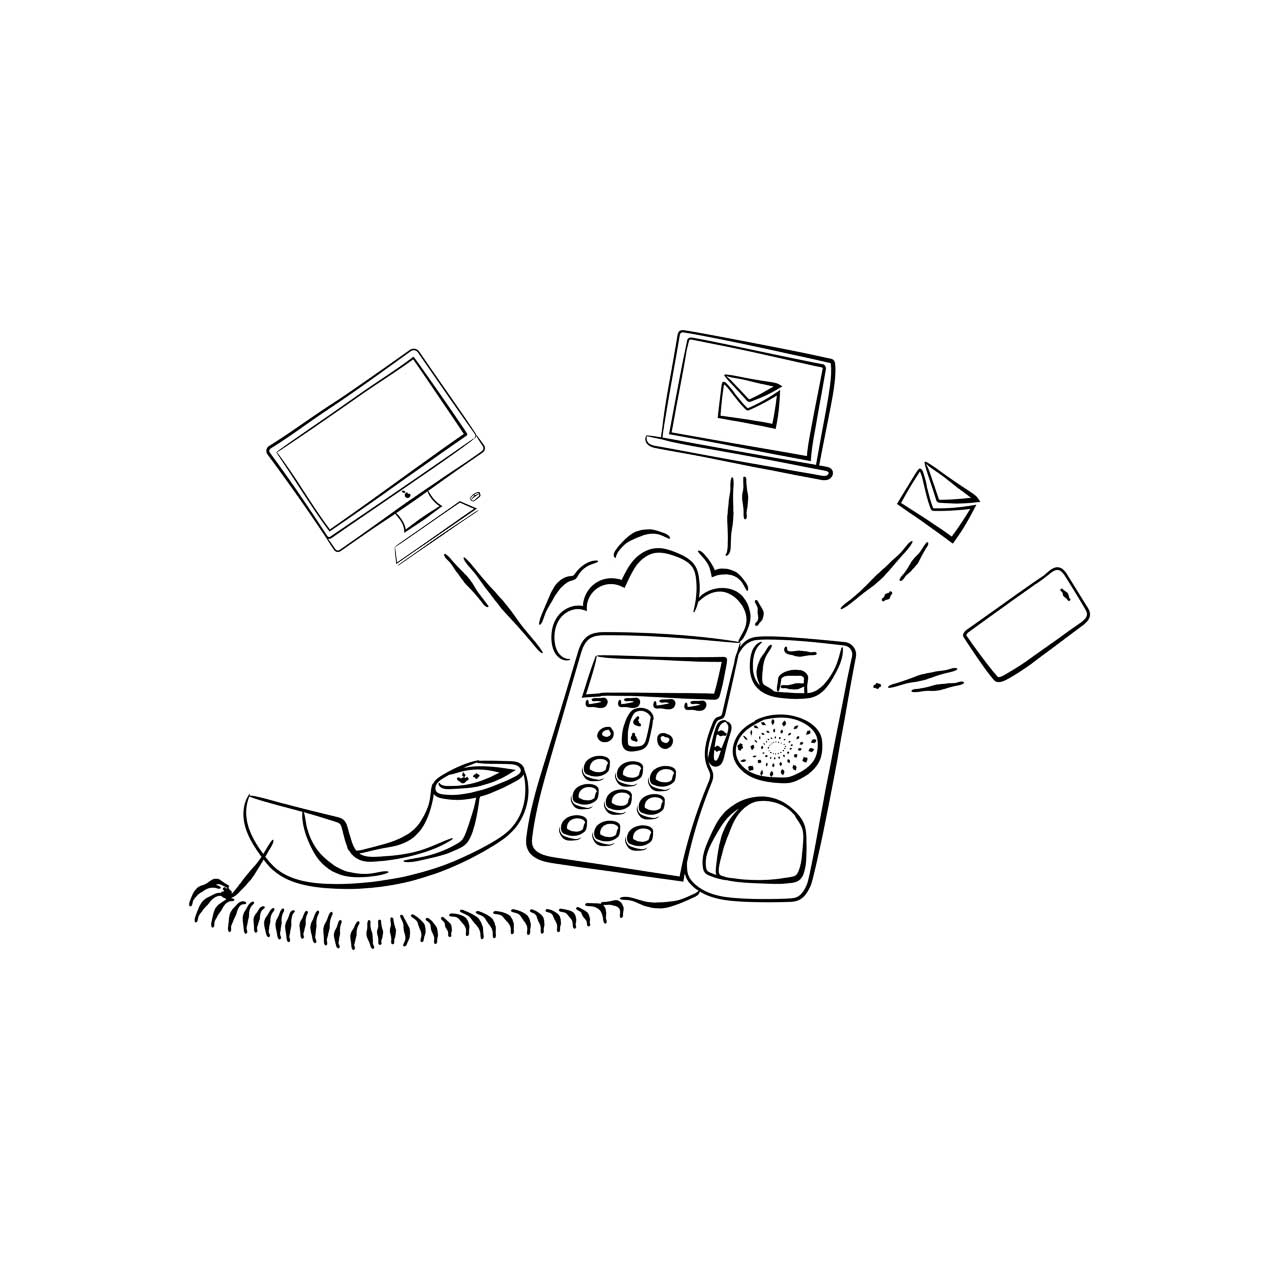 Managing your phone system using our hosted PBX VOIP platform will save you money, provide versatility and convenience.